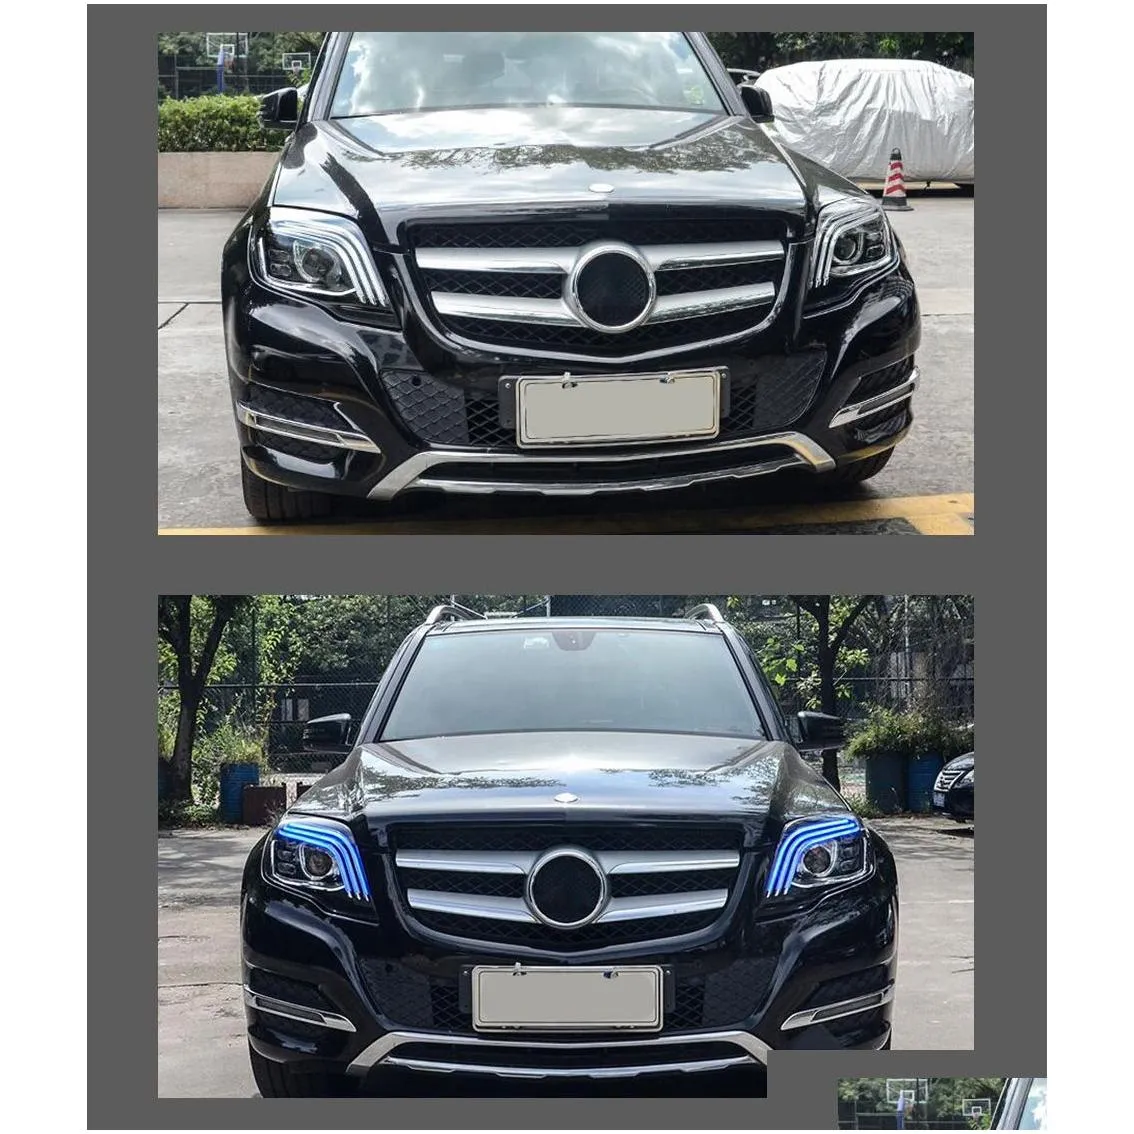 Auto Parts For GLK X204 Headlights 2008-20 15 Upgrade  Styling LED Daytime Lights Turn Signal Lamp